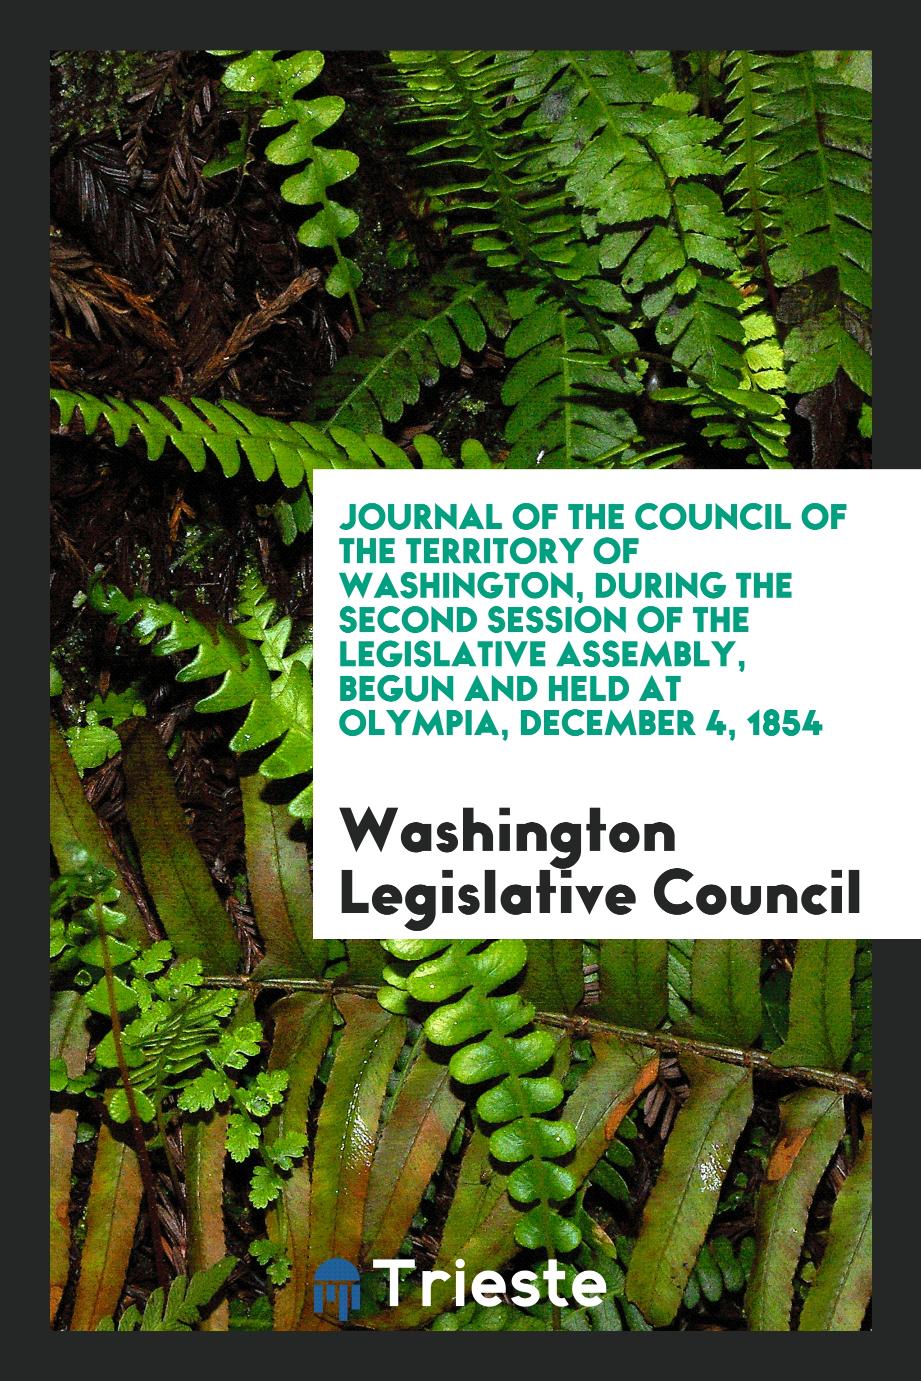 Journal of the Council of the Territory of Washington, During the Second Session of the Legislative Assembly, Begun and Held at Olympia, December 4, 1854